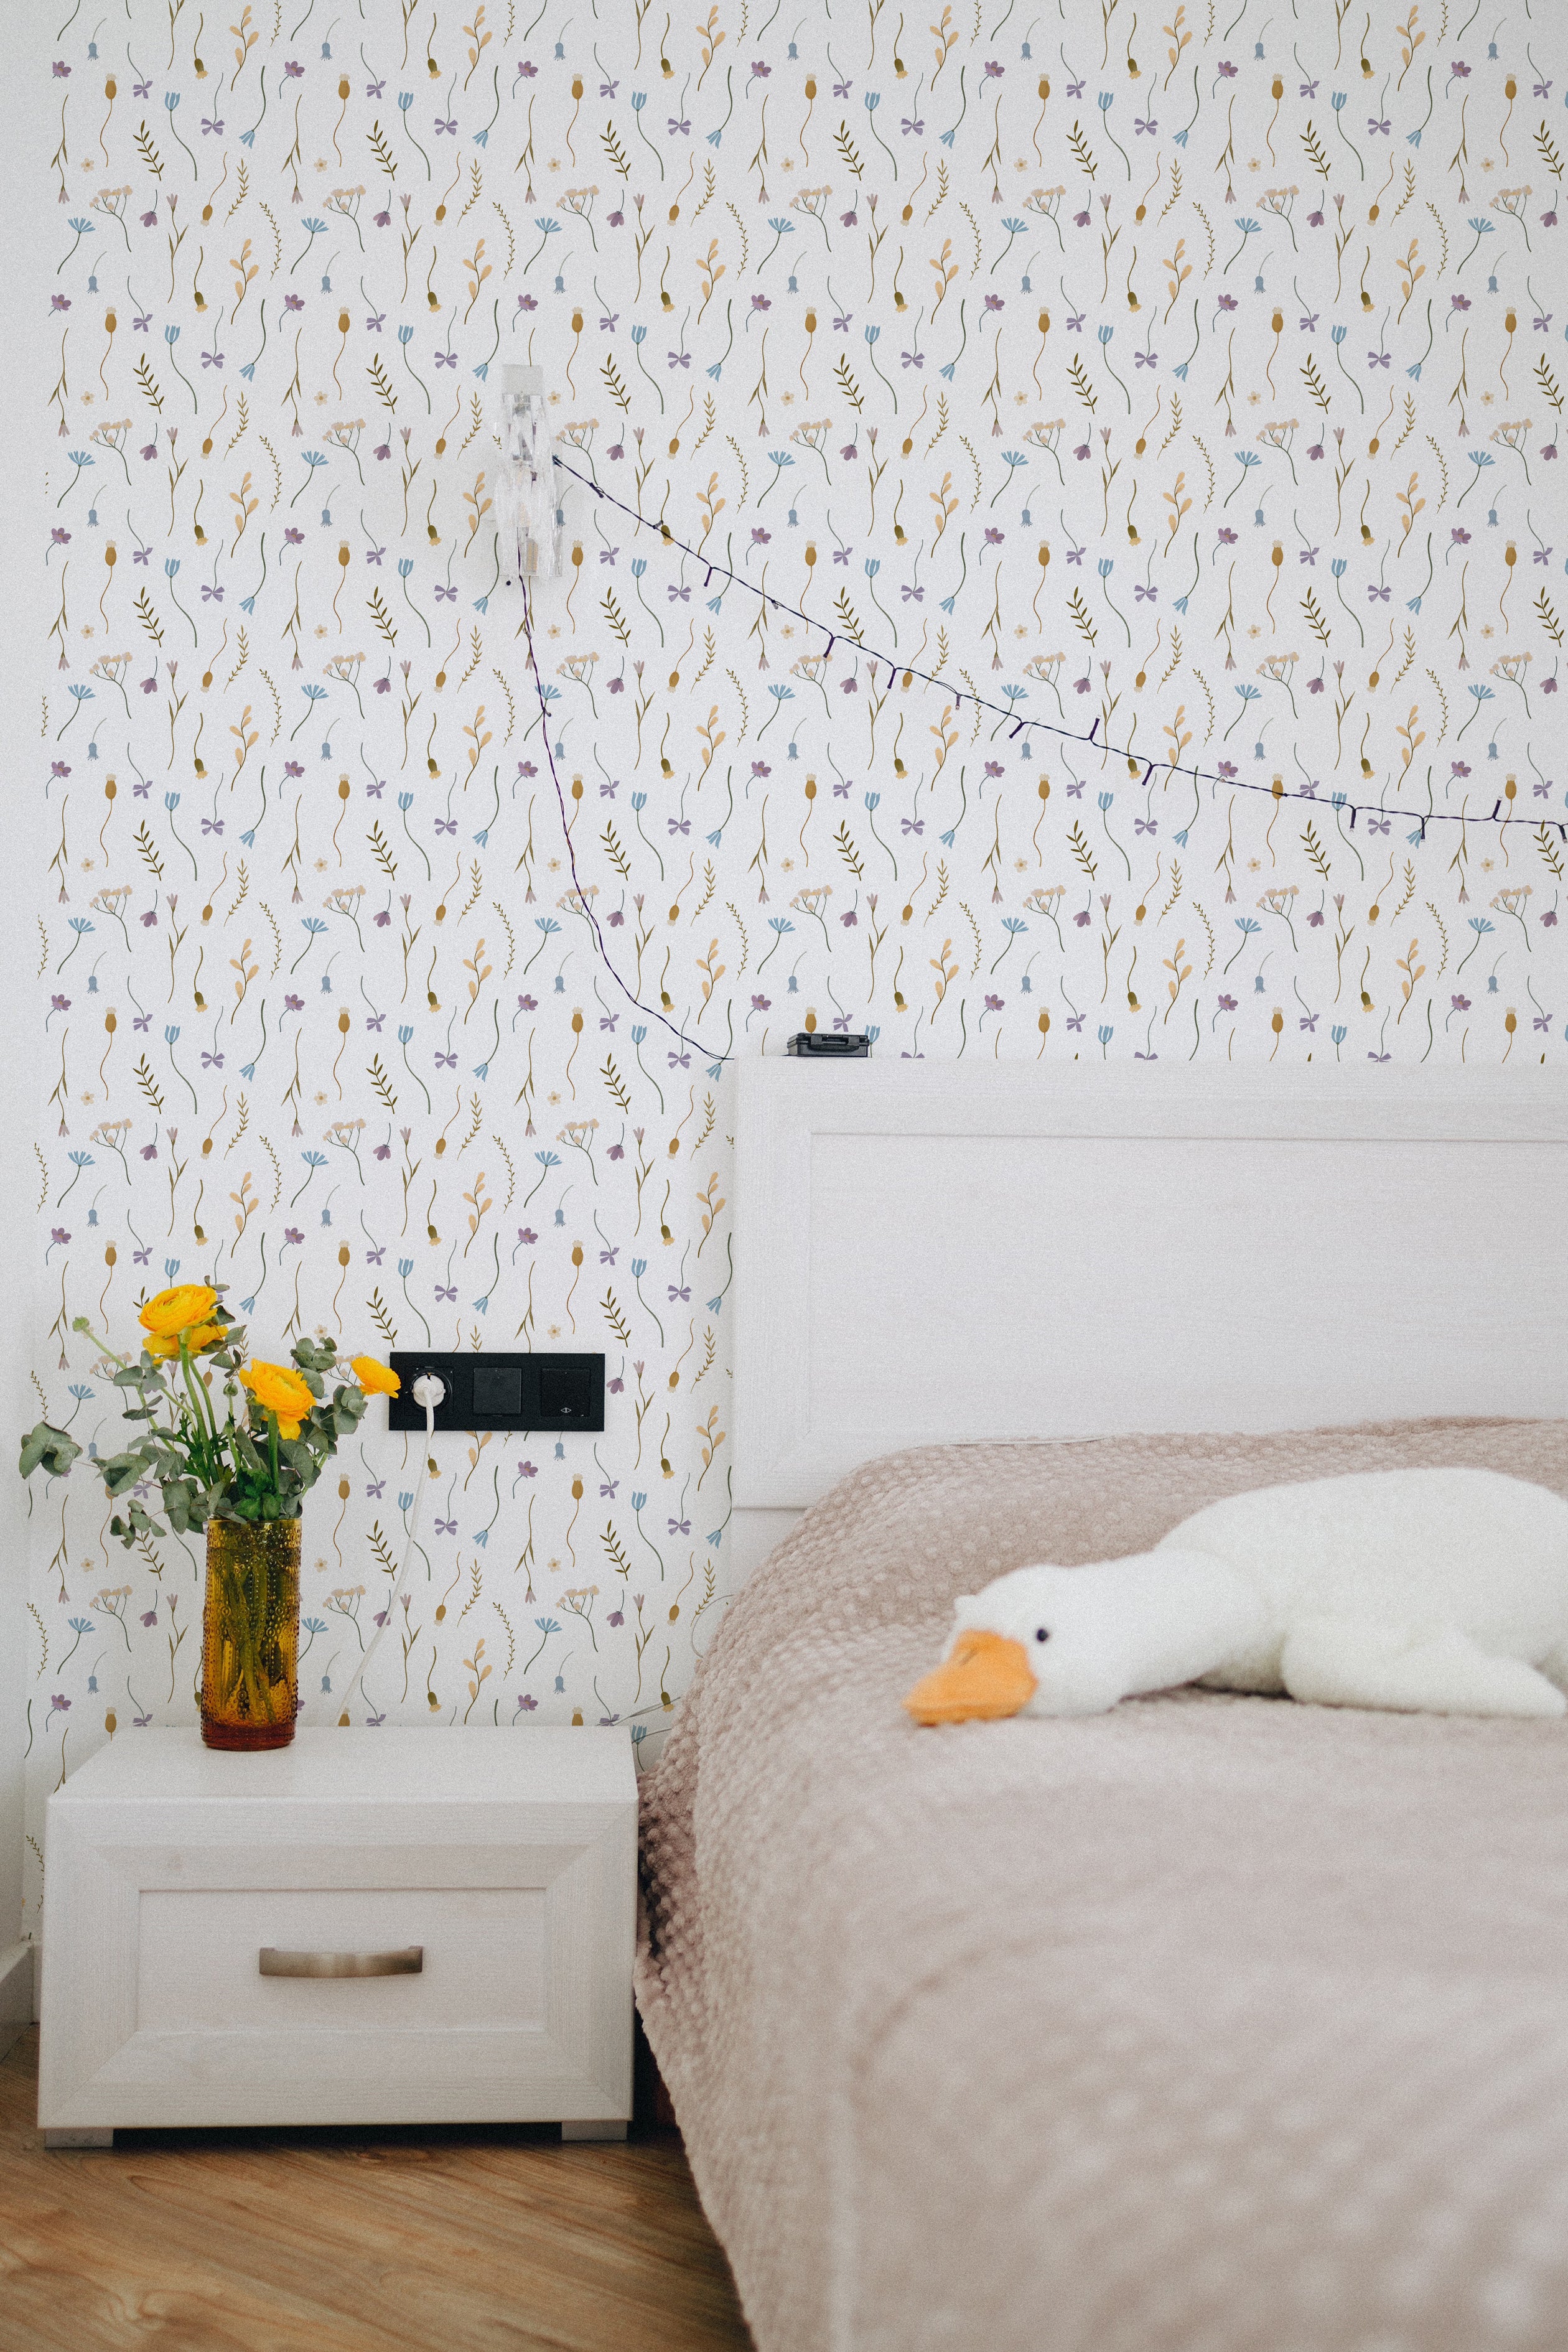 A cozy bedroom setting featuring the Minimal Paradise Wallpaper. The wallpaper adds a subtle and elegant backdrop to the room, complemented by simple decor including a wooden bedside table with a lamp, a vase of fresh flowers, and a white plush toy. The wallpaper’s understated botanical design enhances the room's calm and peaceful ambiance.